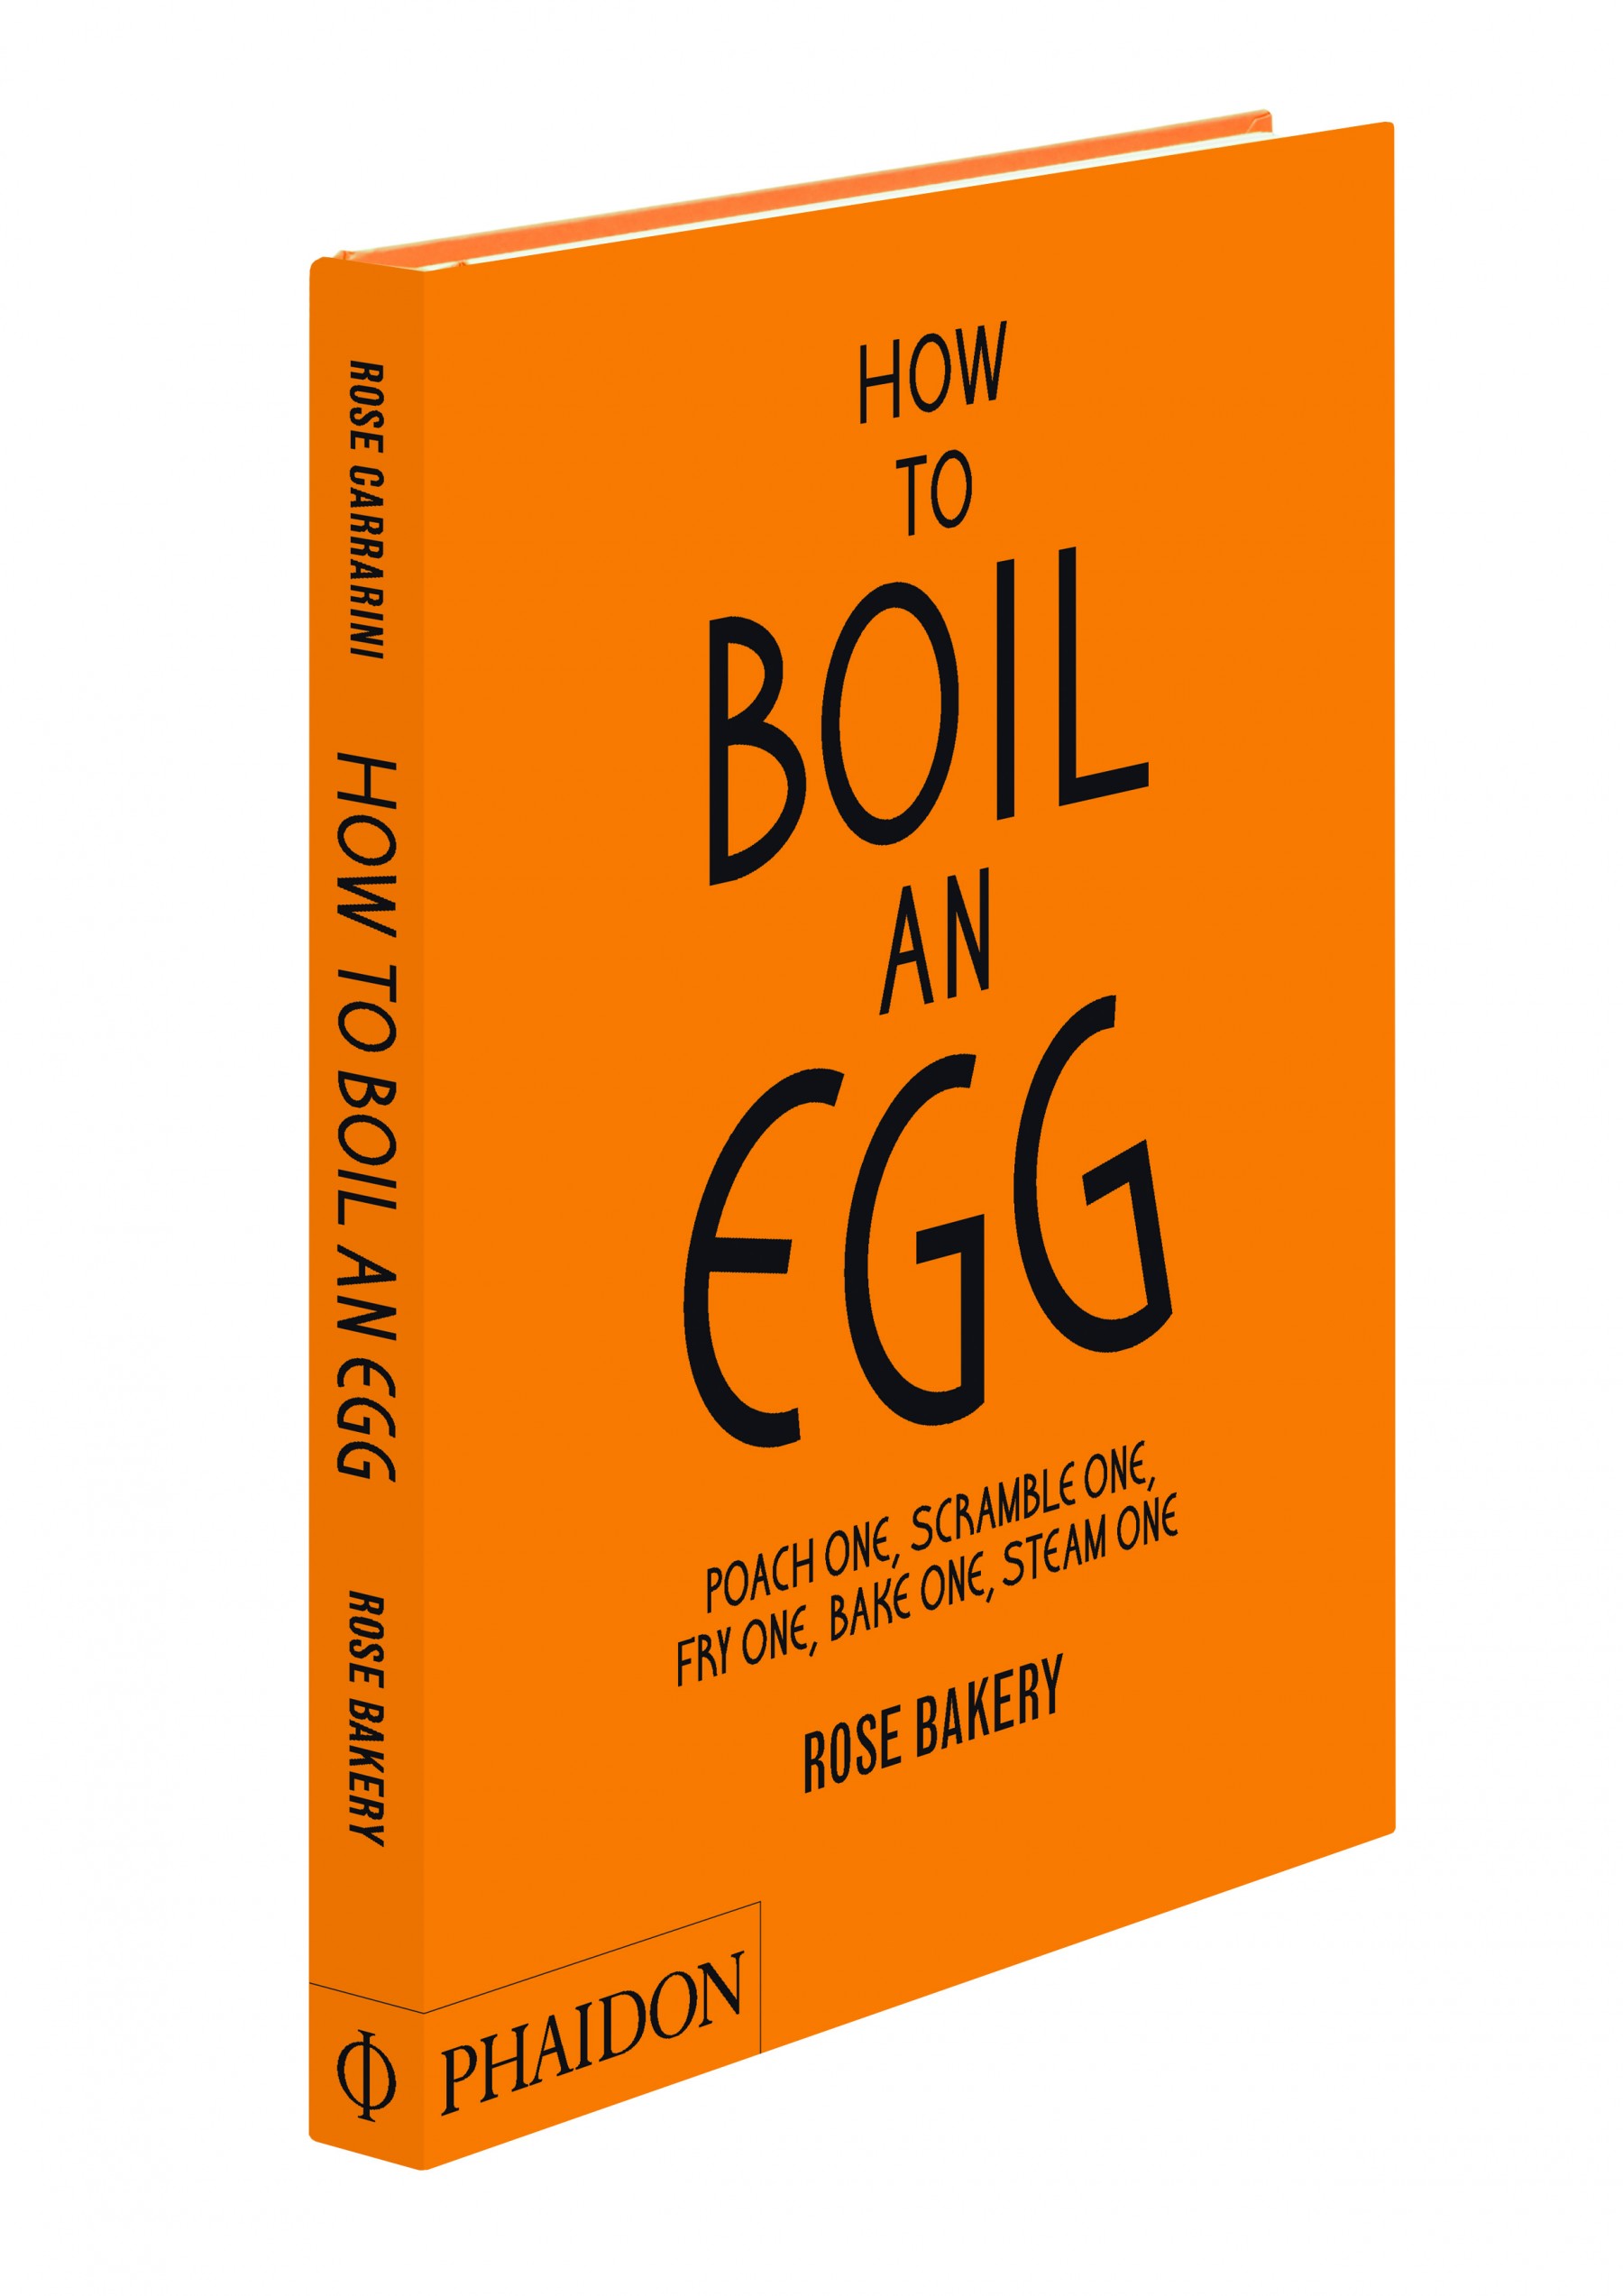 ARKET-how_to_boil_an_egg_book_shot